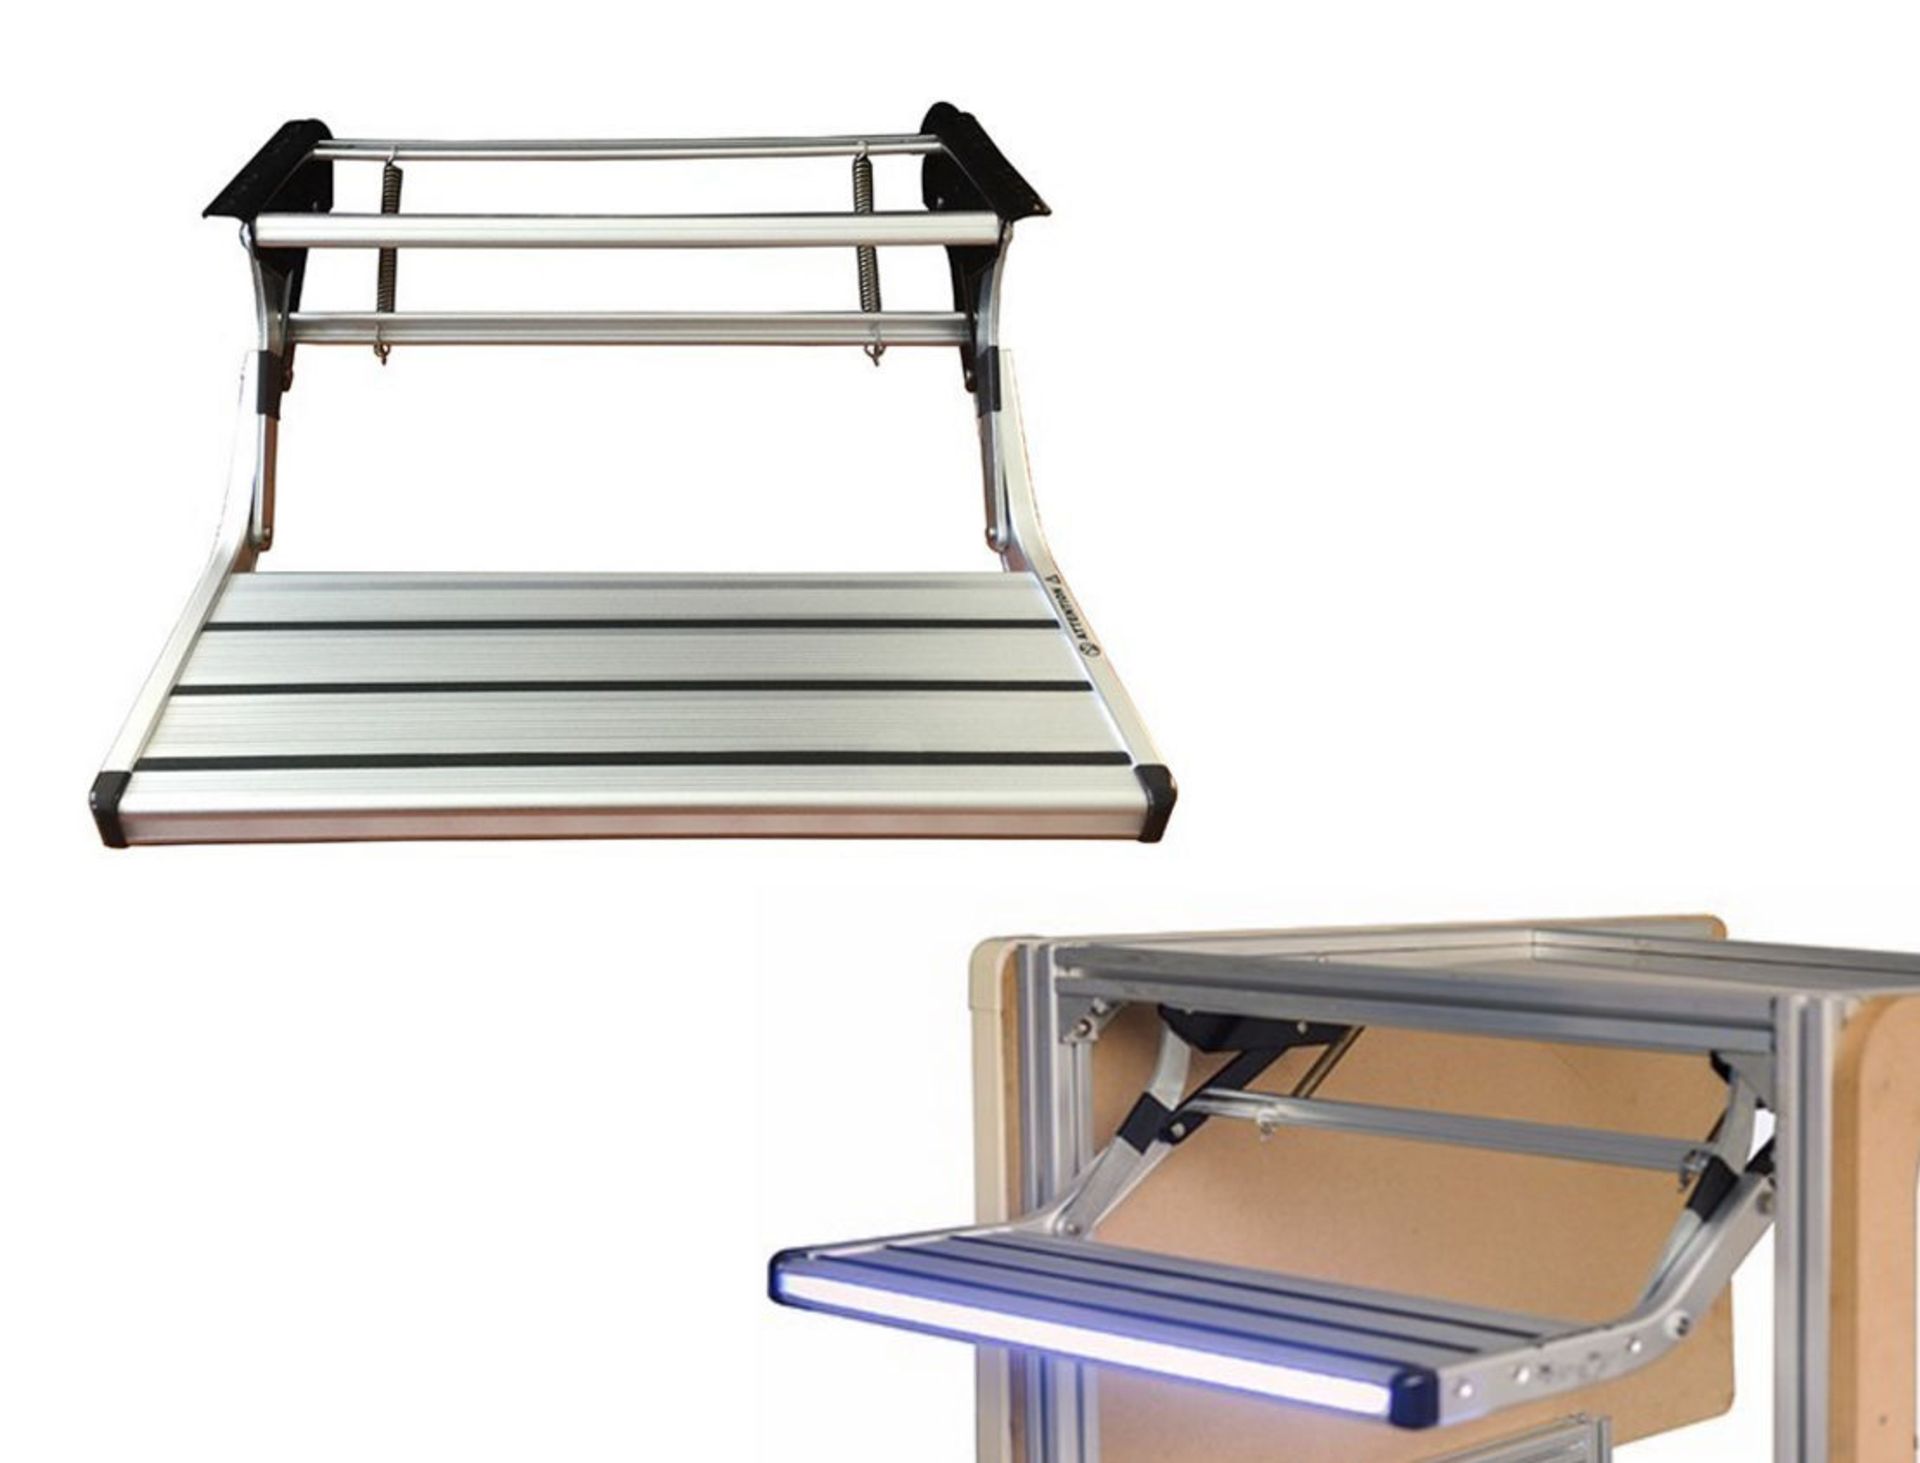 SWING DOWN ALUMINIUM MOTORHOME/CARAVAN STEP WITH LIGHT - QTY: 1 550mm wide with a capacity of 200kgs